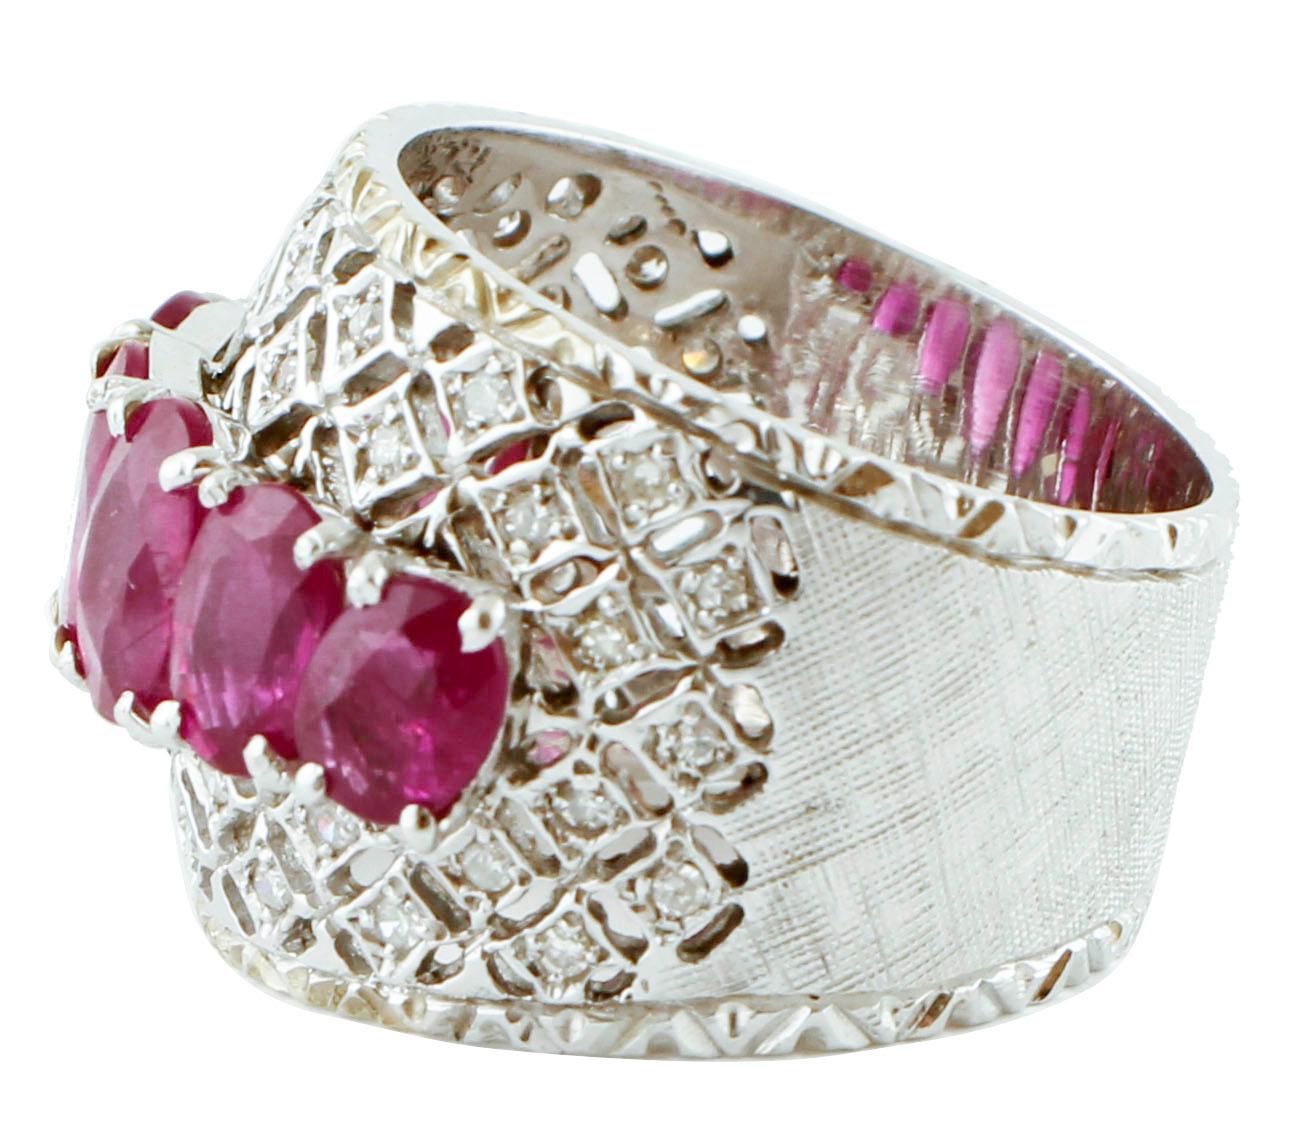 SHIPPING POLICY:
No additional costs will be added to this order.
Shipping costs will be totally covered by the seller (customs duties included).

Elegant and unique band ring in 14K white gold structure mounted with 5.71 ct of pink rubies row and